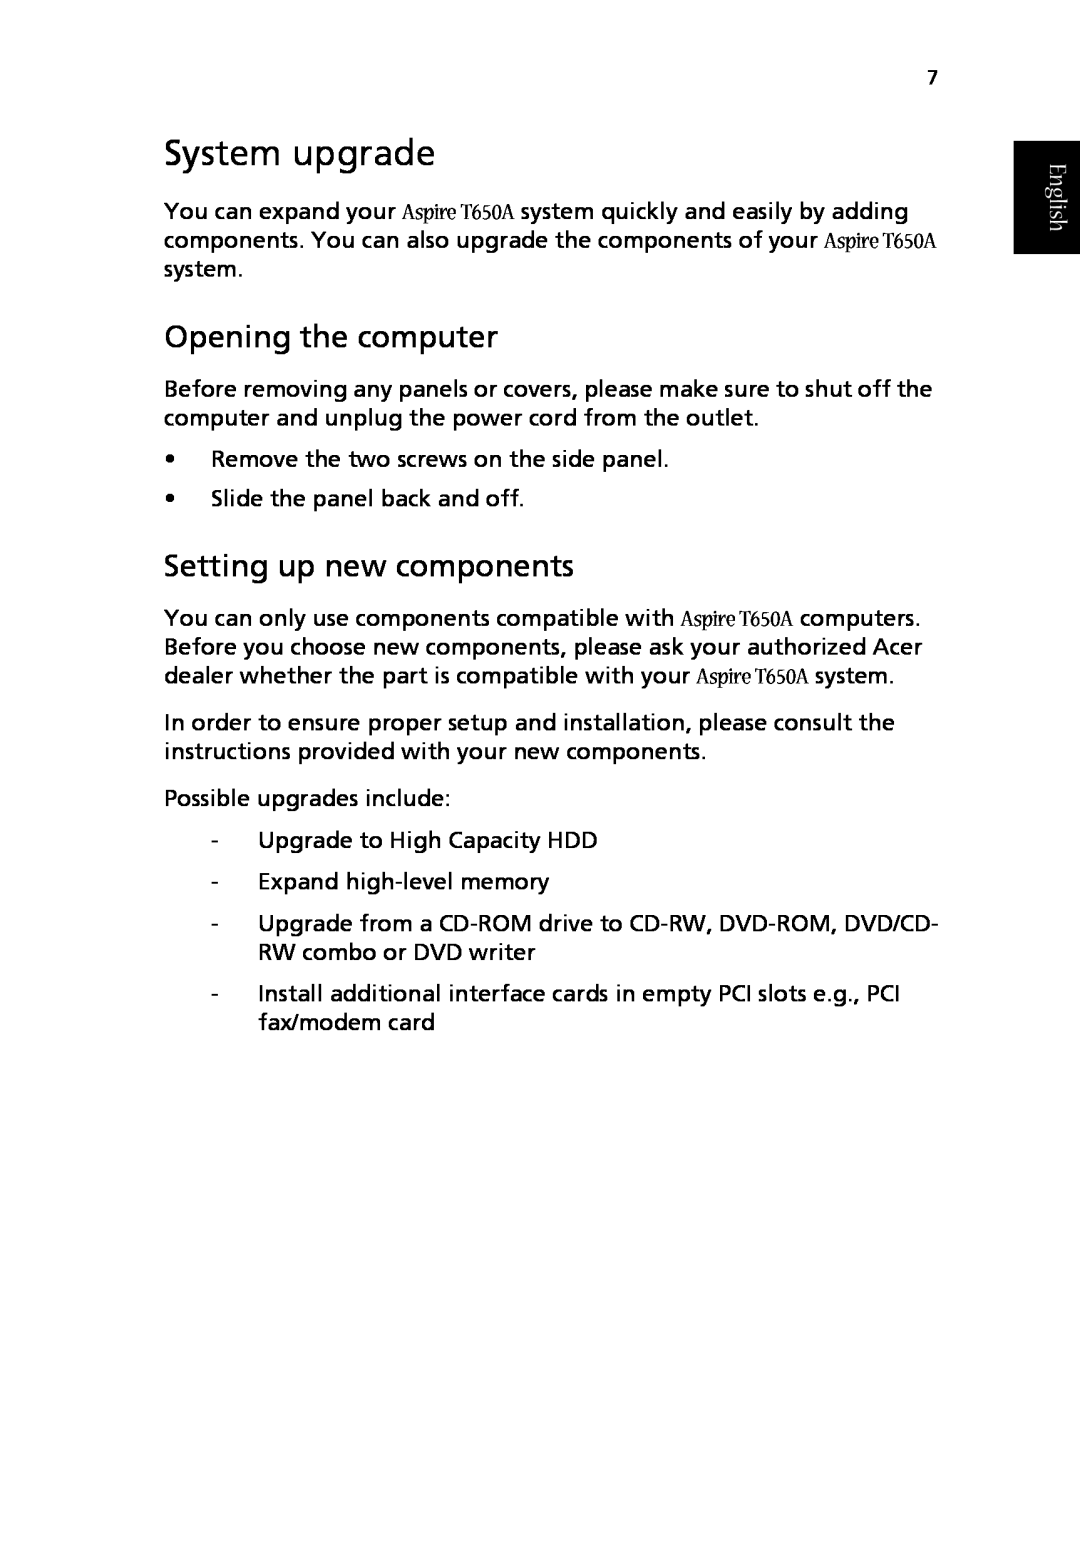 Acer T650A manual System upgrade, Opening the computer, Setting up new components, English 